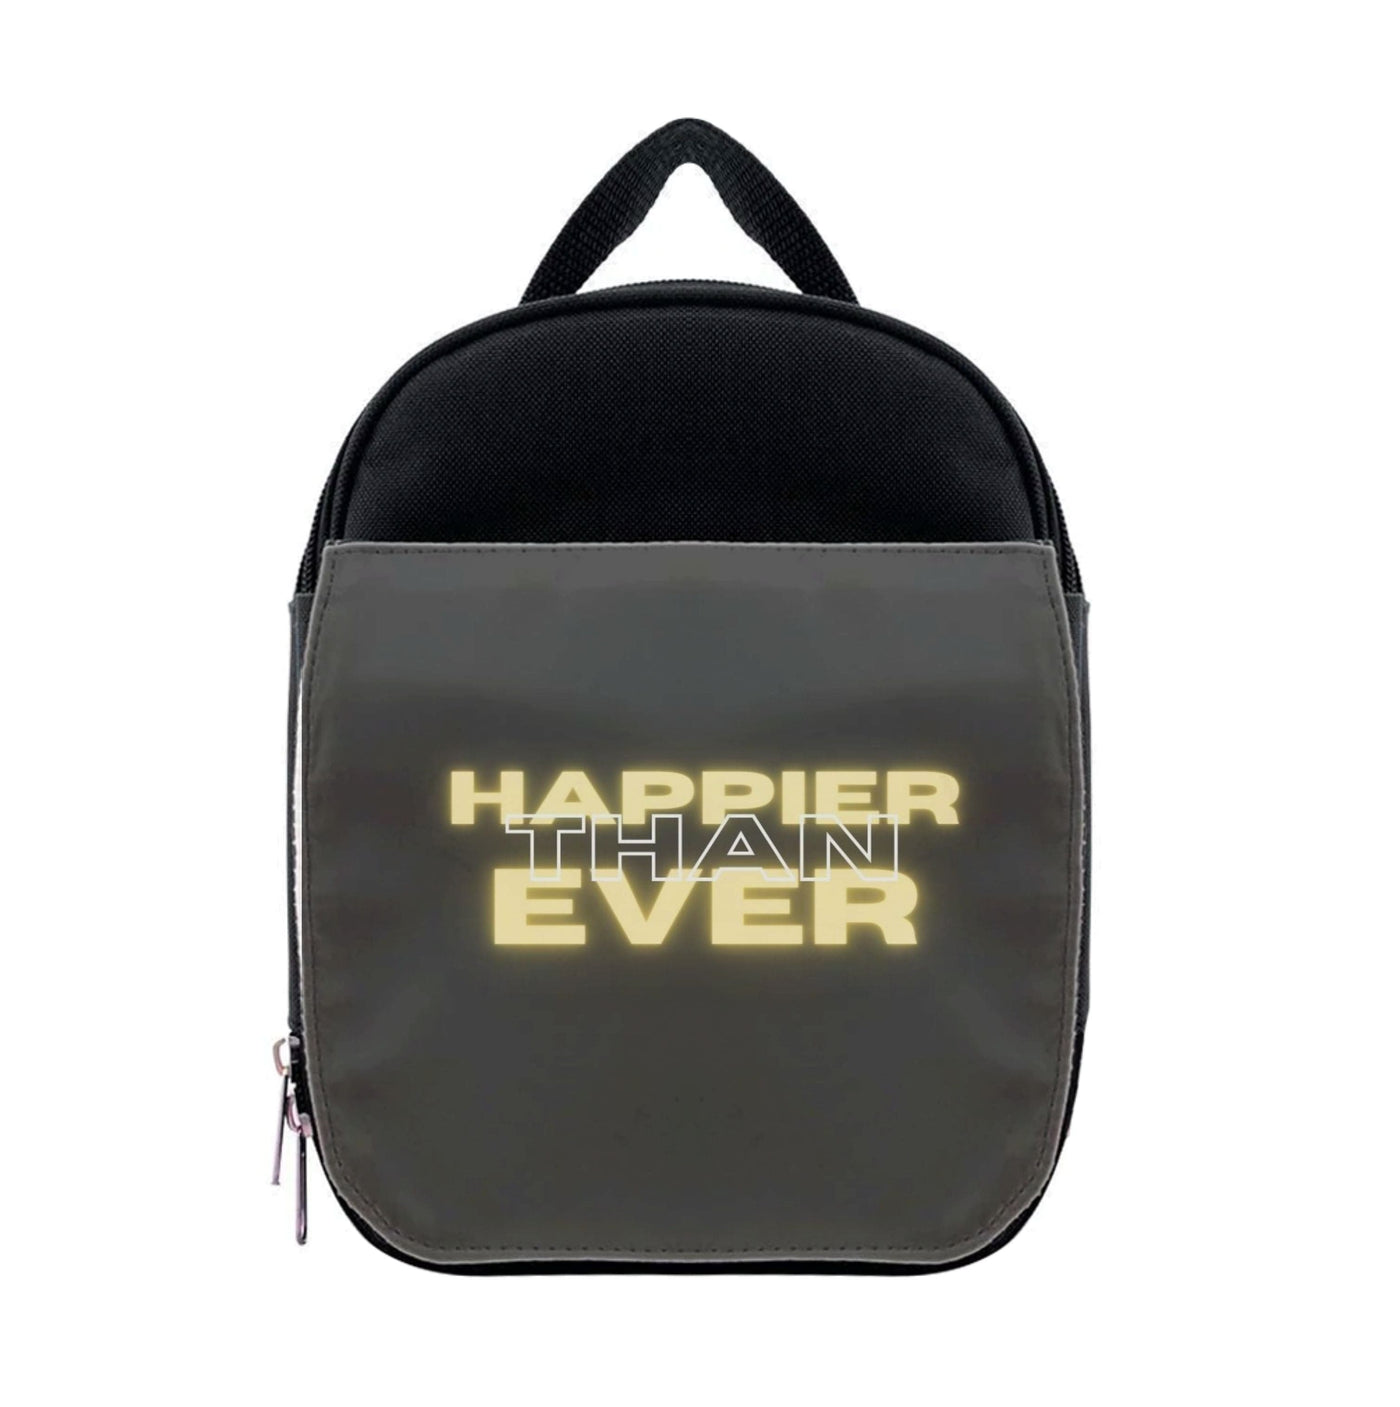 Happier Than Ever - Sassy Quote Lunchbox